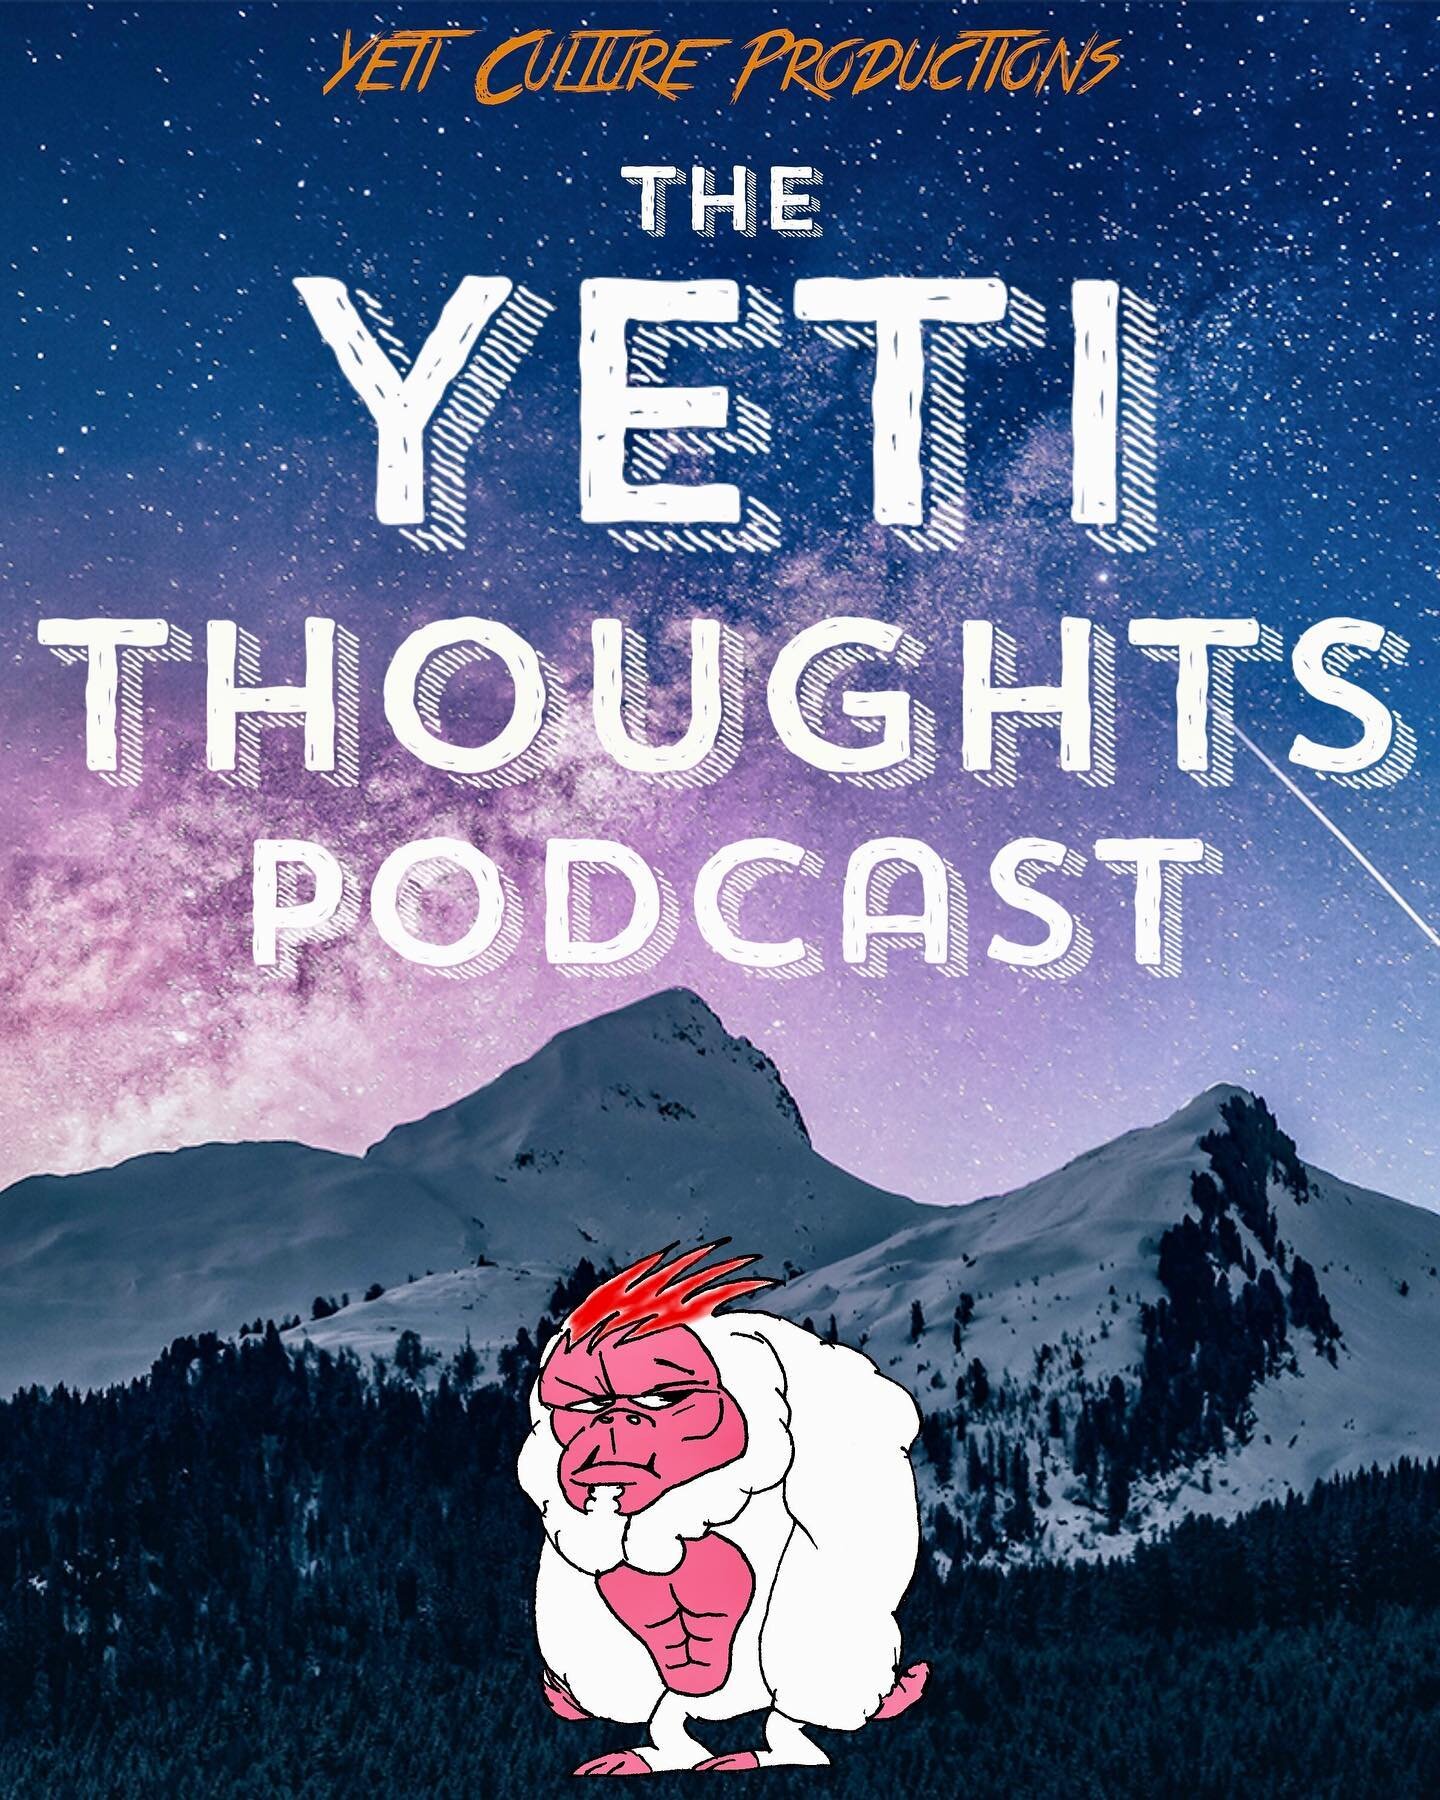 Yeti Thoughts Podcast coming soon!  DM @yeticulture to schedule studio time at The Yeti Culture Studio! #yeticulture #yetithoughts #podcast #PNW yeticulture.com